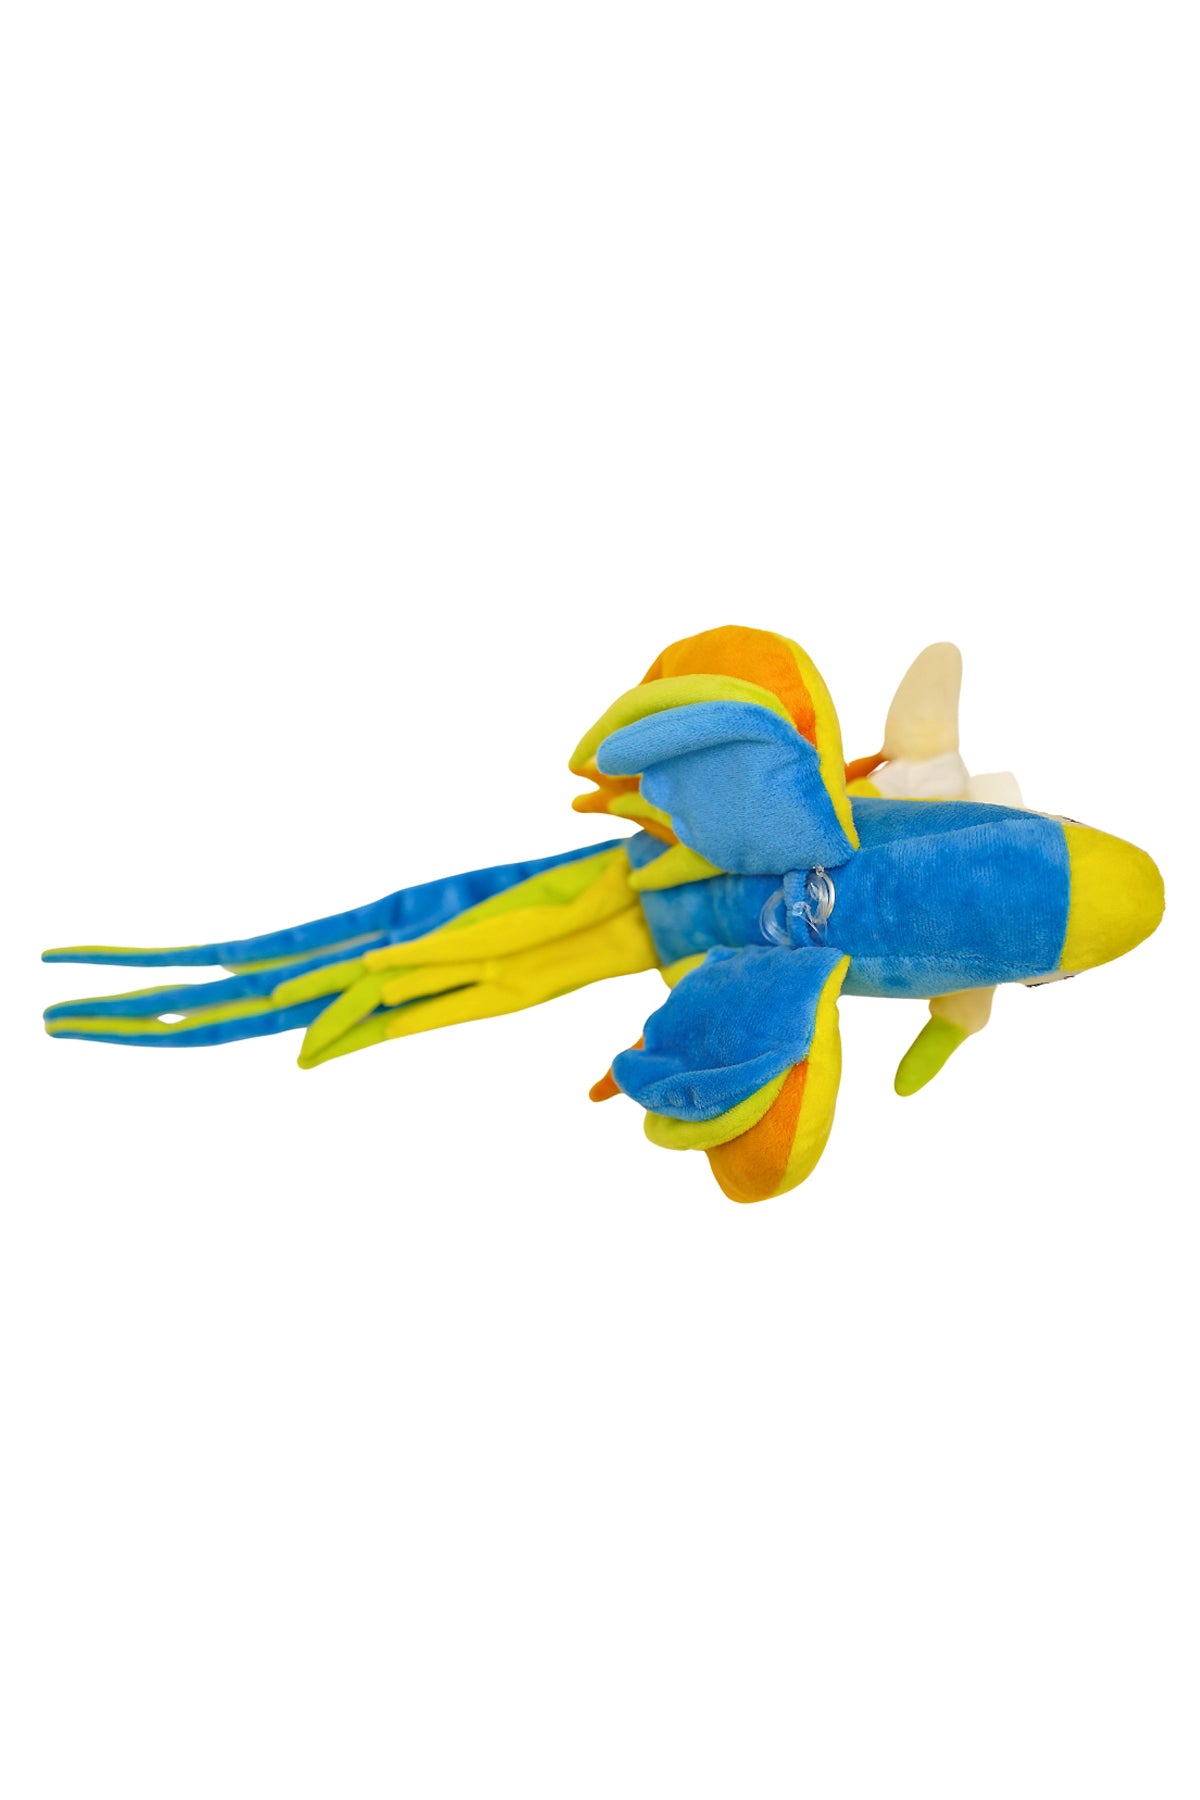 The Parrot Stuff Toy (STY-1251)